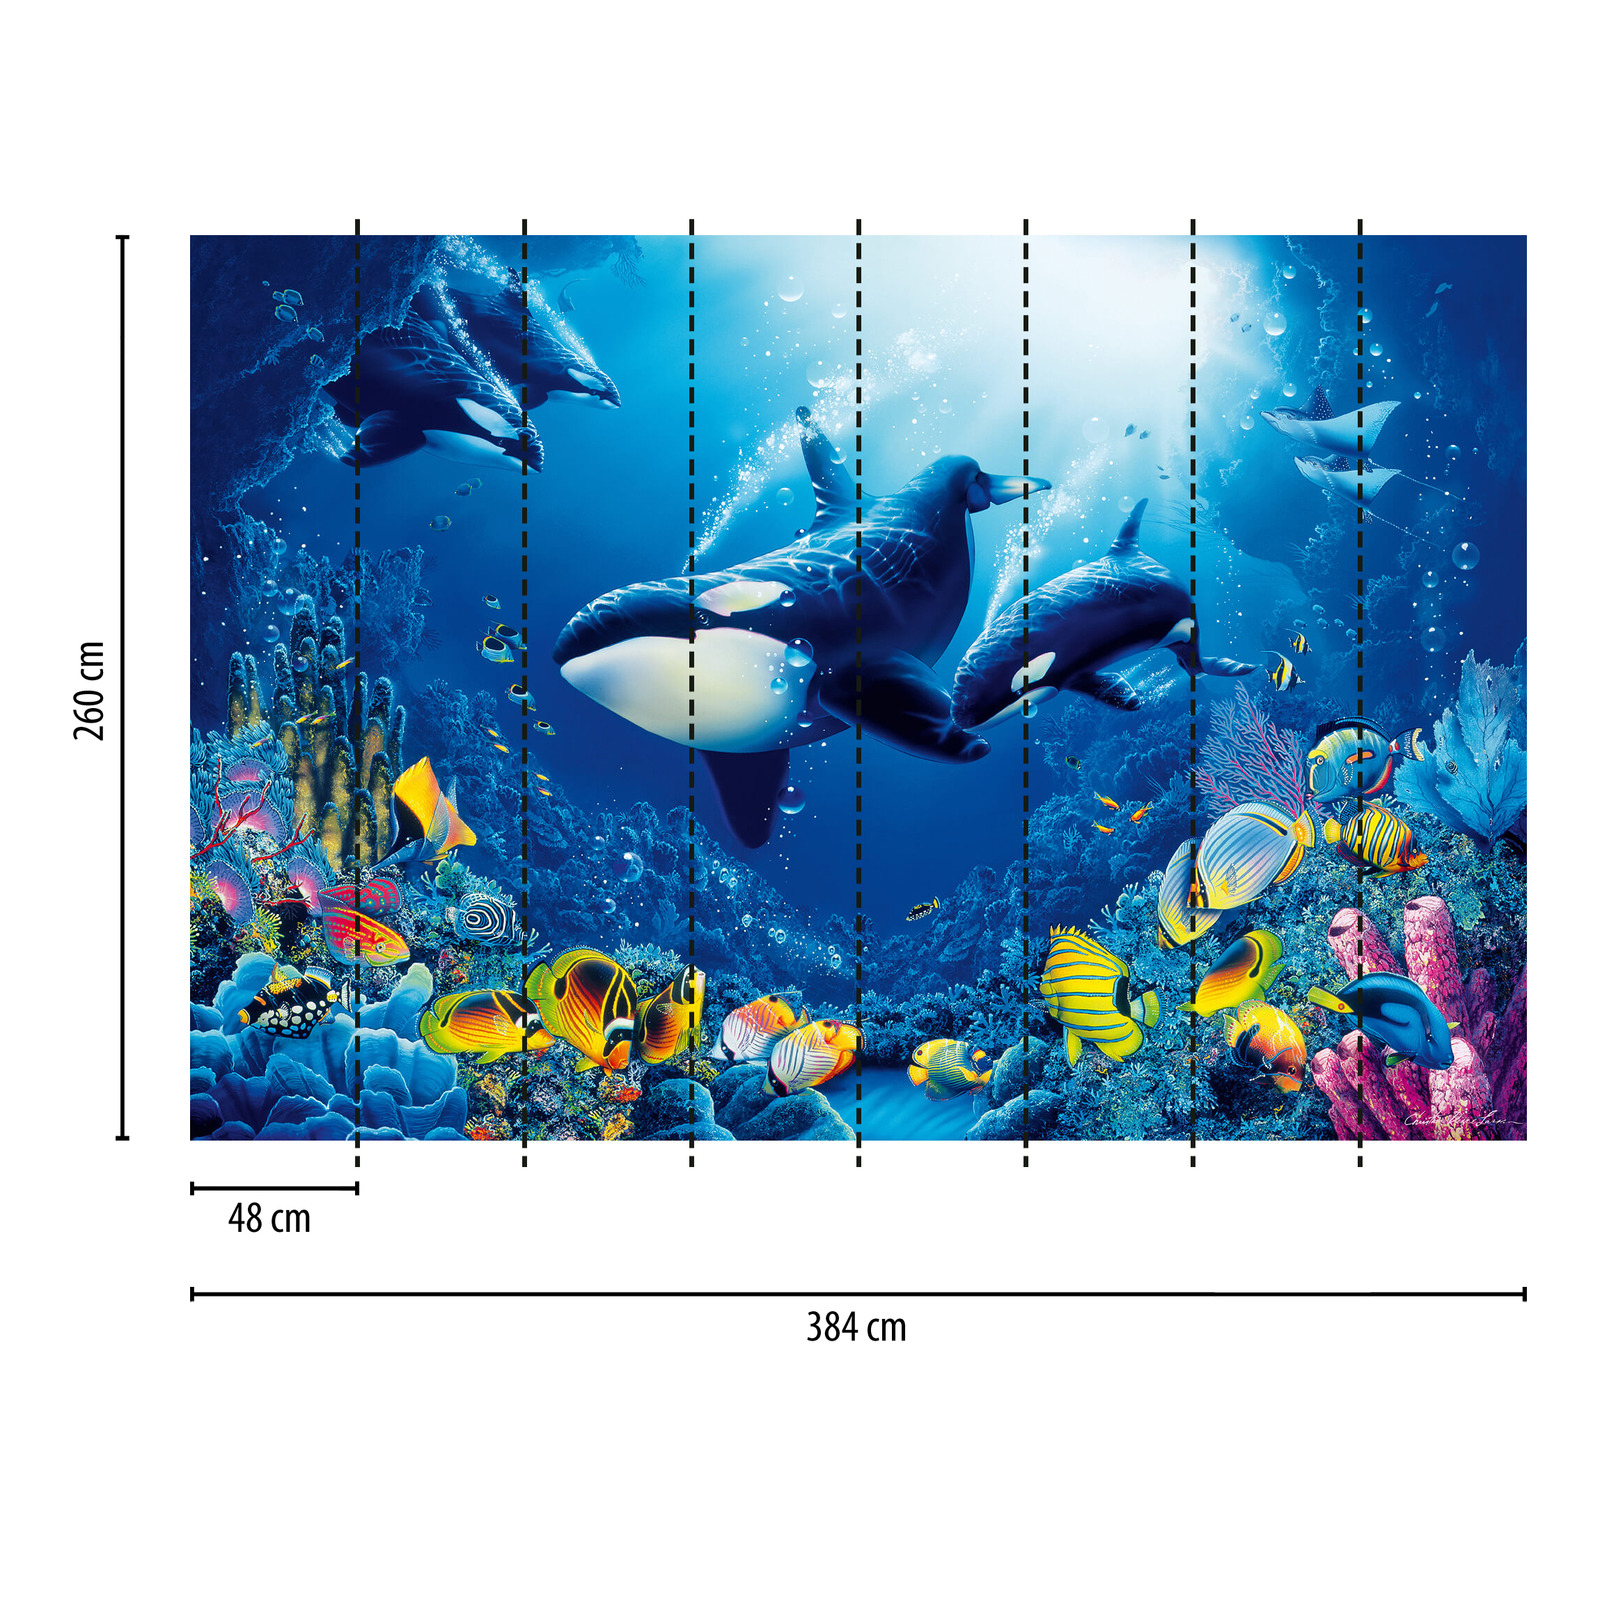             Underwater wall mural Whales, Corals & Fishes
        